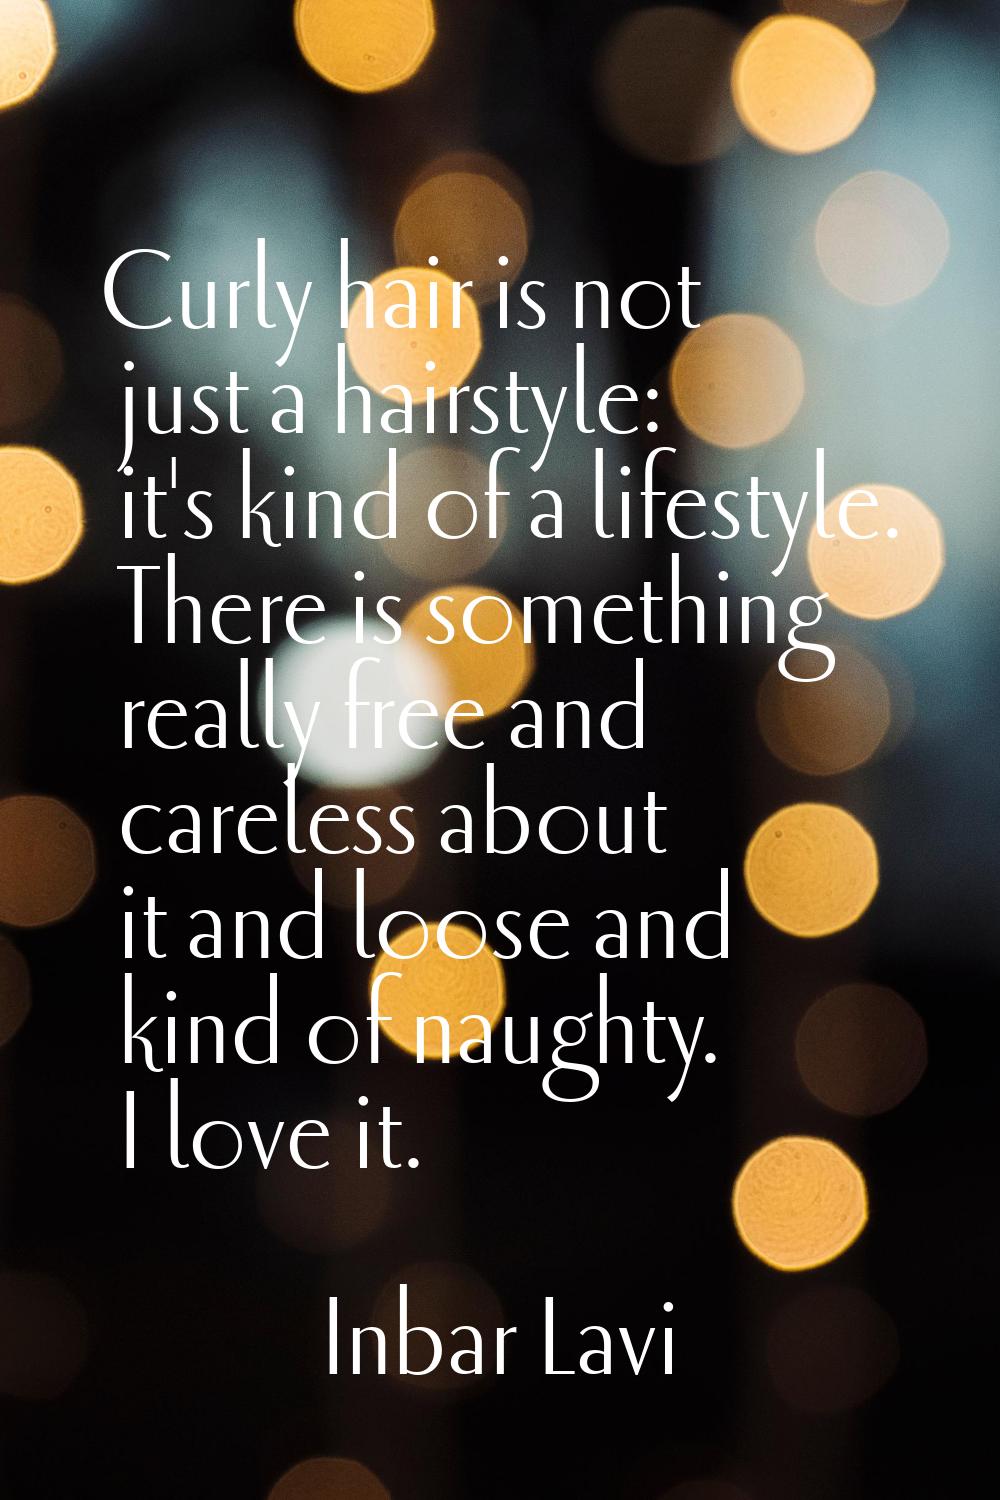 Curly hair is not just a hairstyle: it's kind of a lifestyle. There is something really free and ca